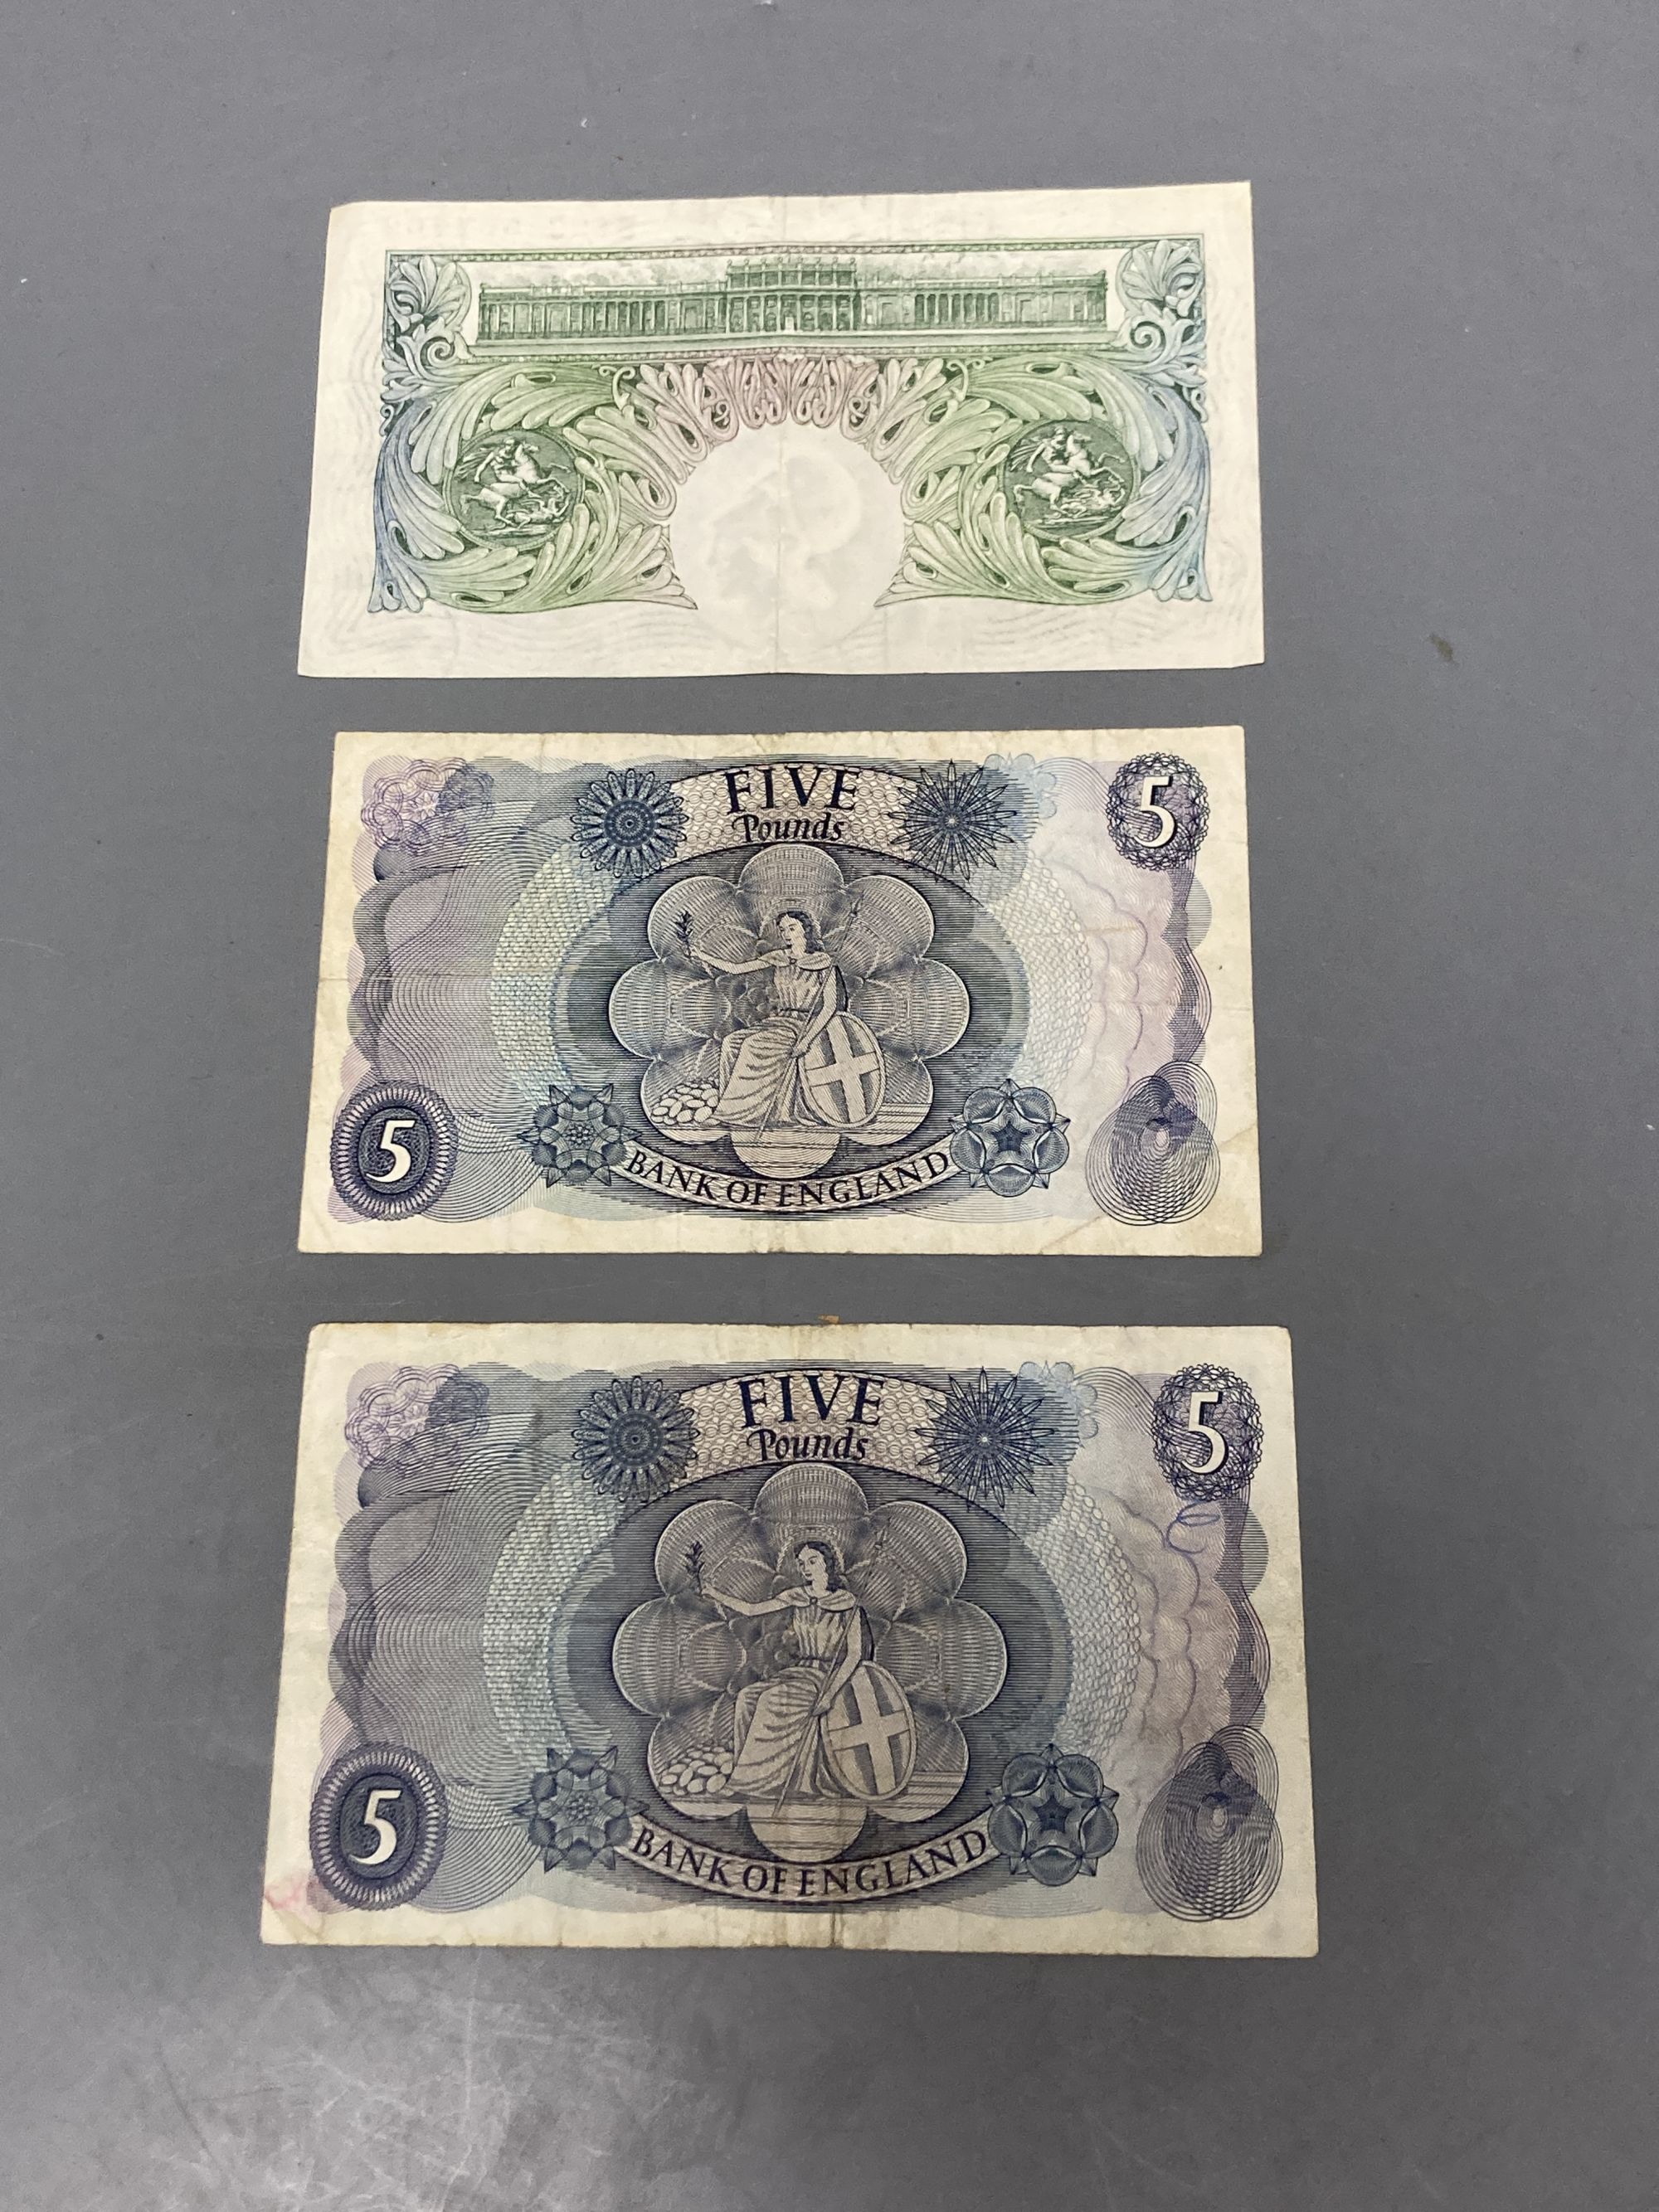 Two £5 notes and one £1 note